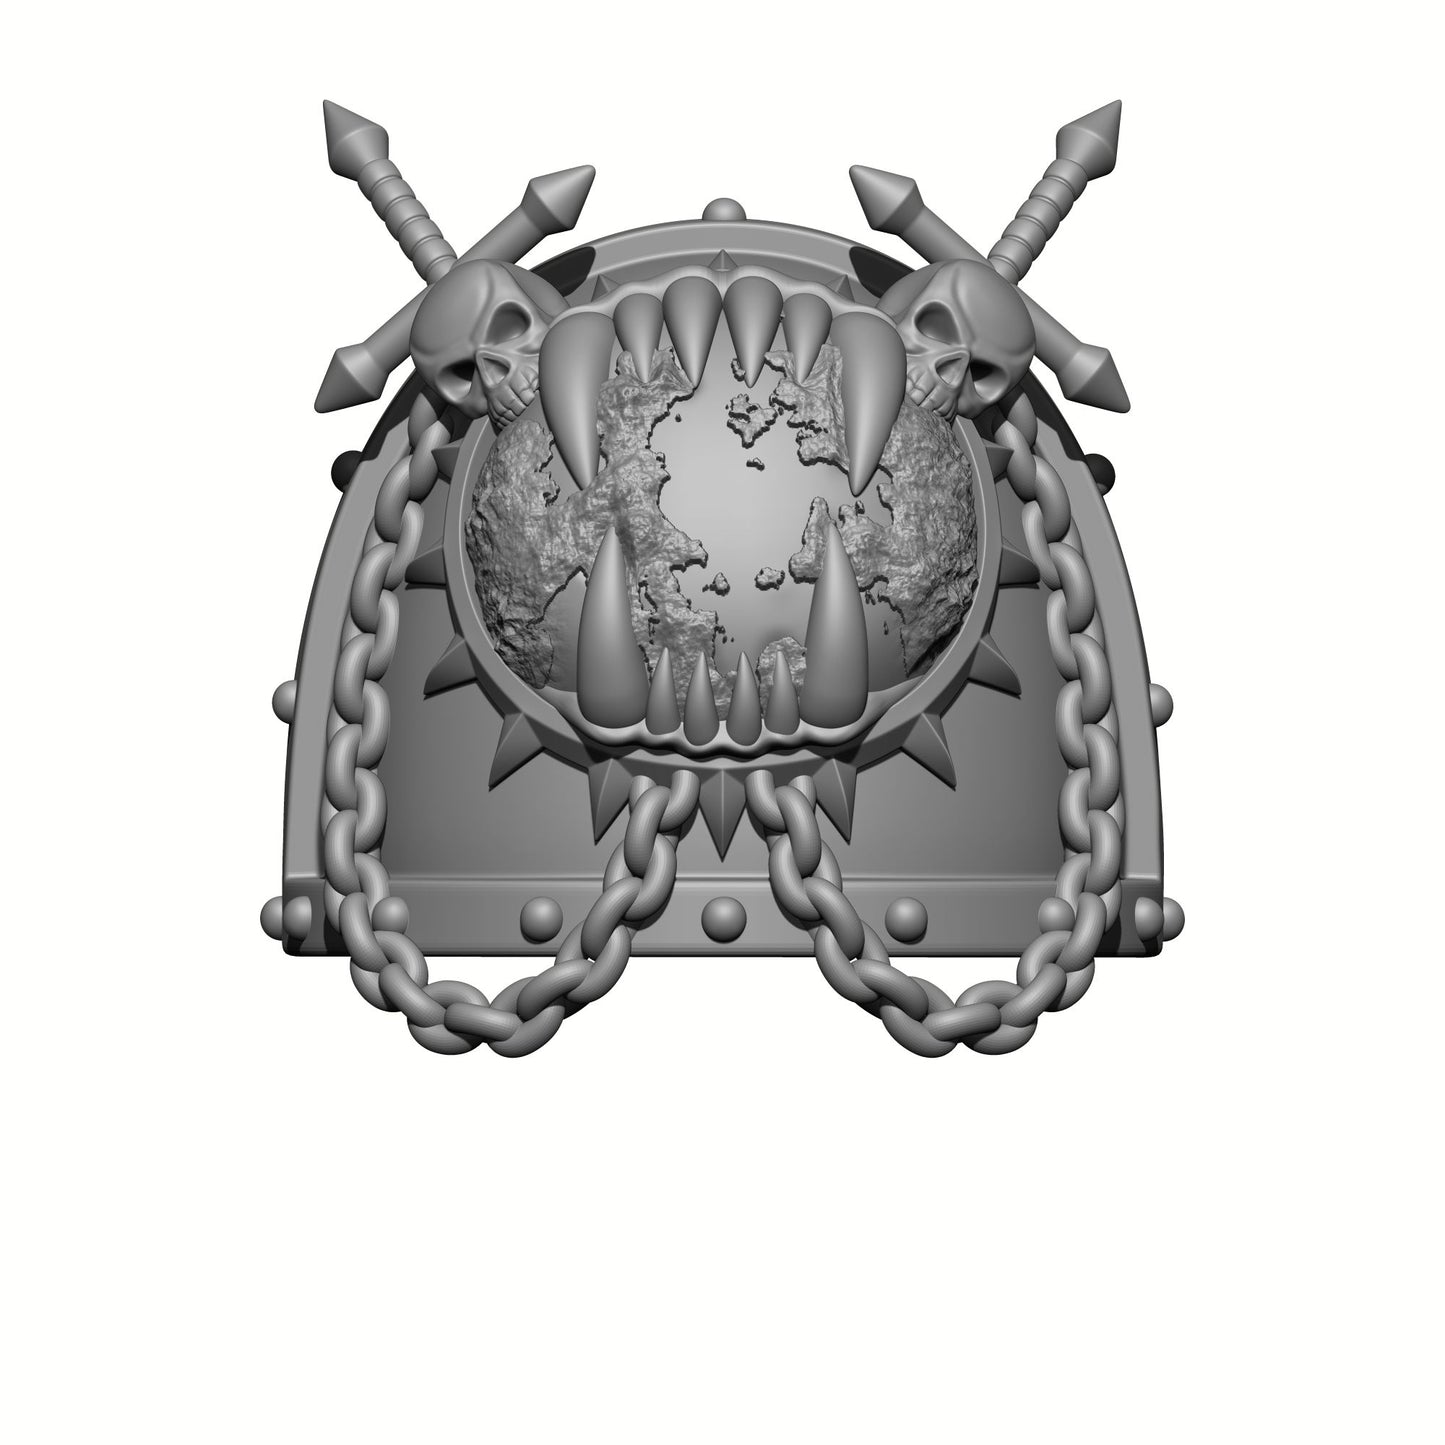 World Eaters Chapter MKVII Shoulder Pad Maw eating Planet Two Skulls Chains and Two Swords: Compatible with McFarlane Space Marine Action Figures Khorne Berserker designed by Fantasy World Games